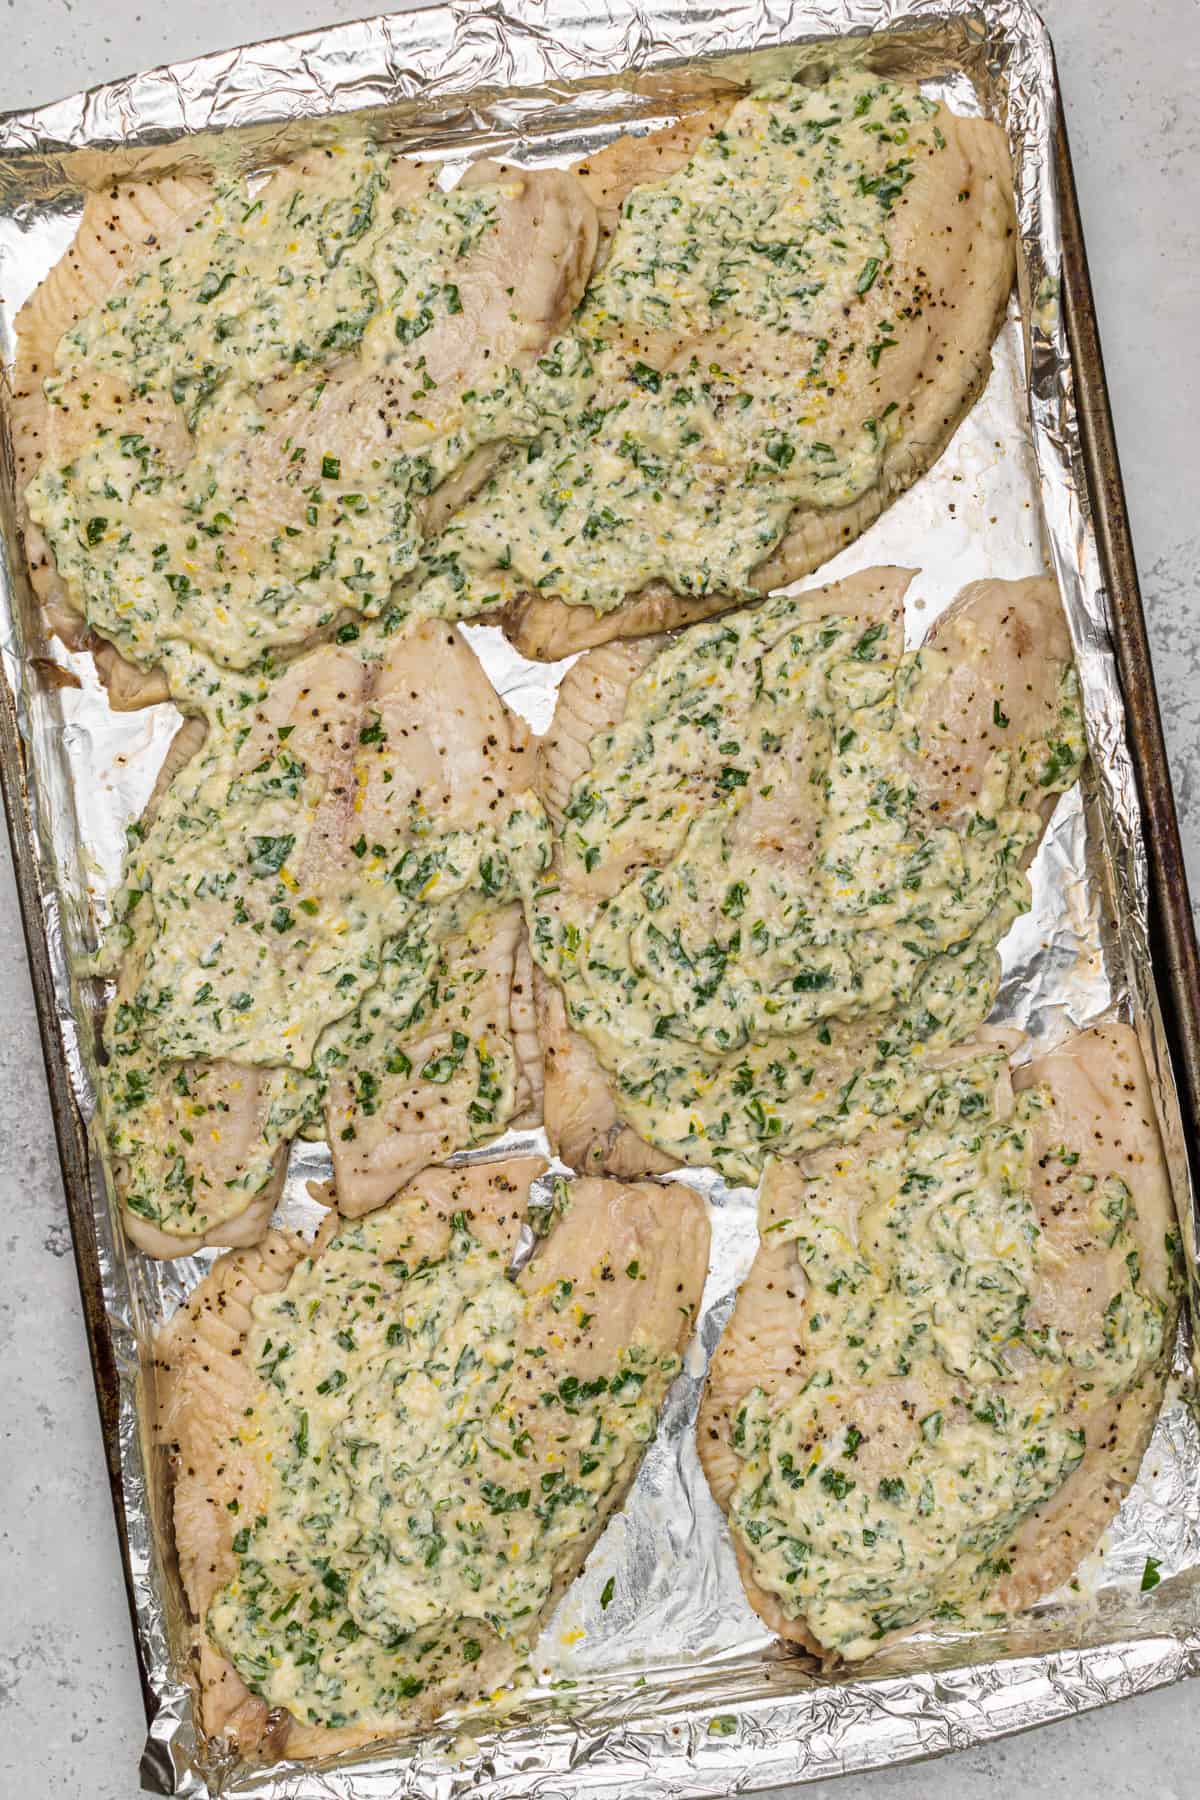 Raw tilapia fillets on baking sheet lined with foil with the lemon parmesan mixture on top of each one.